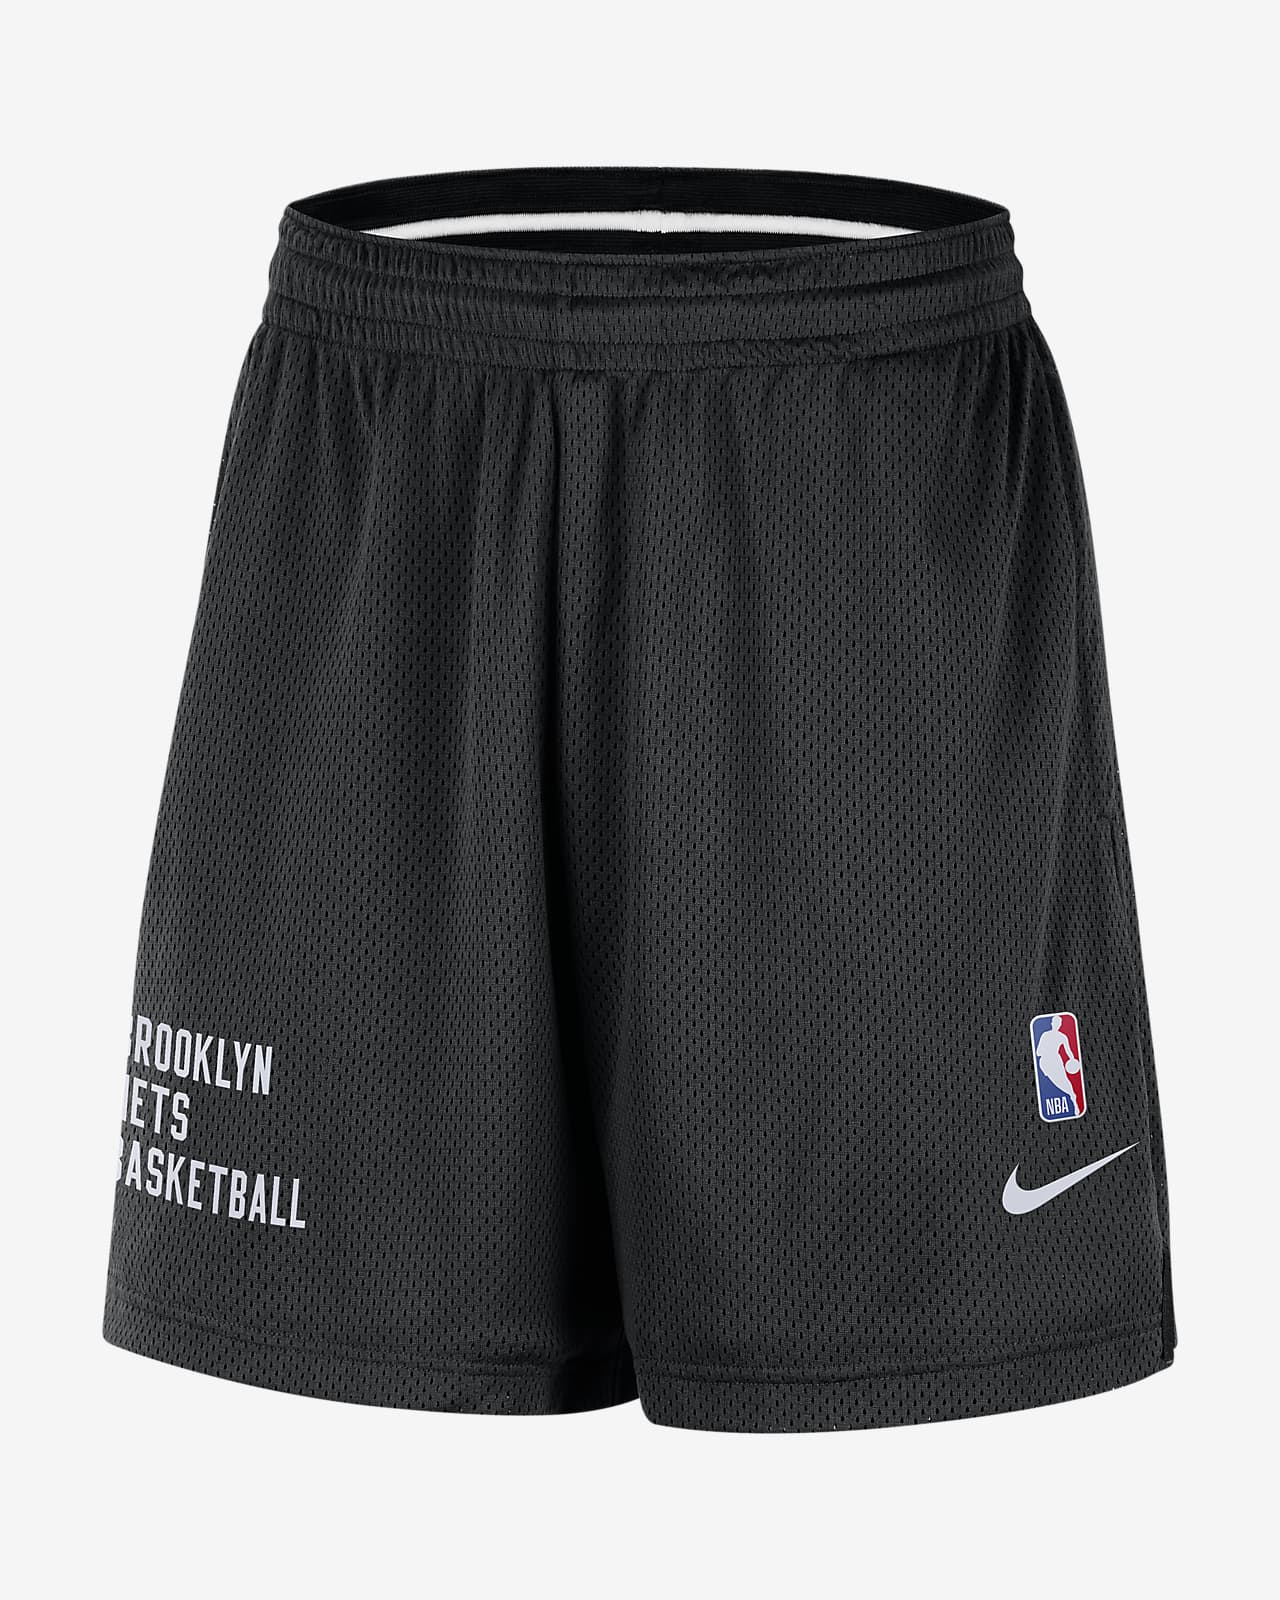 https://static.nike.com/a/images/t_PDP_1280_v1/f_auto,q_auto:eco/18418185-8fa6-4d2b-9a5e-3d675e5c7380/brooklyn-nets-nba-mesh-shorts-ZKFhxX.png